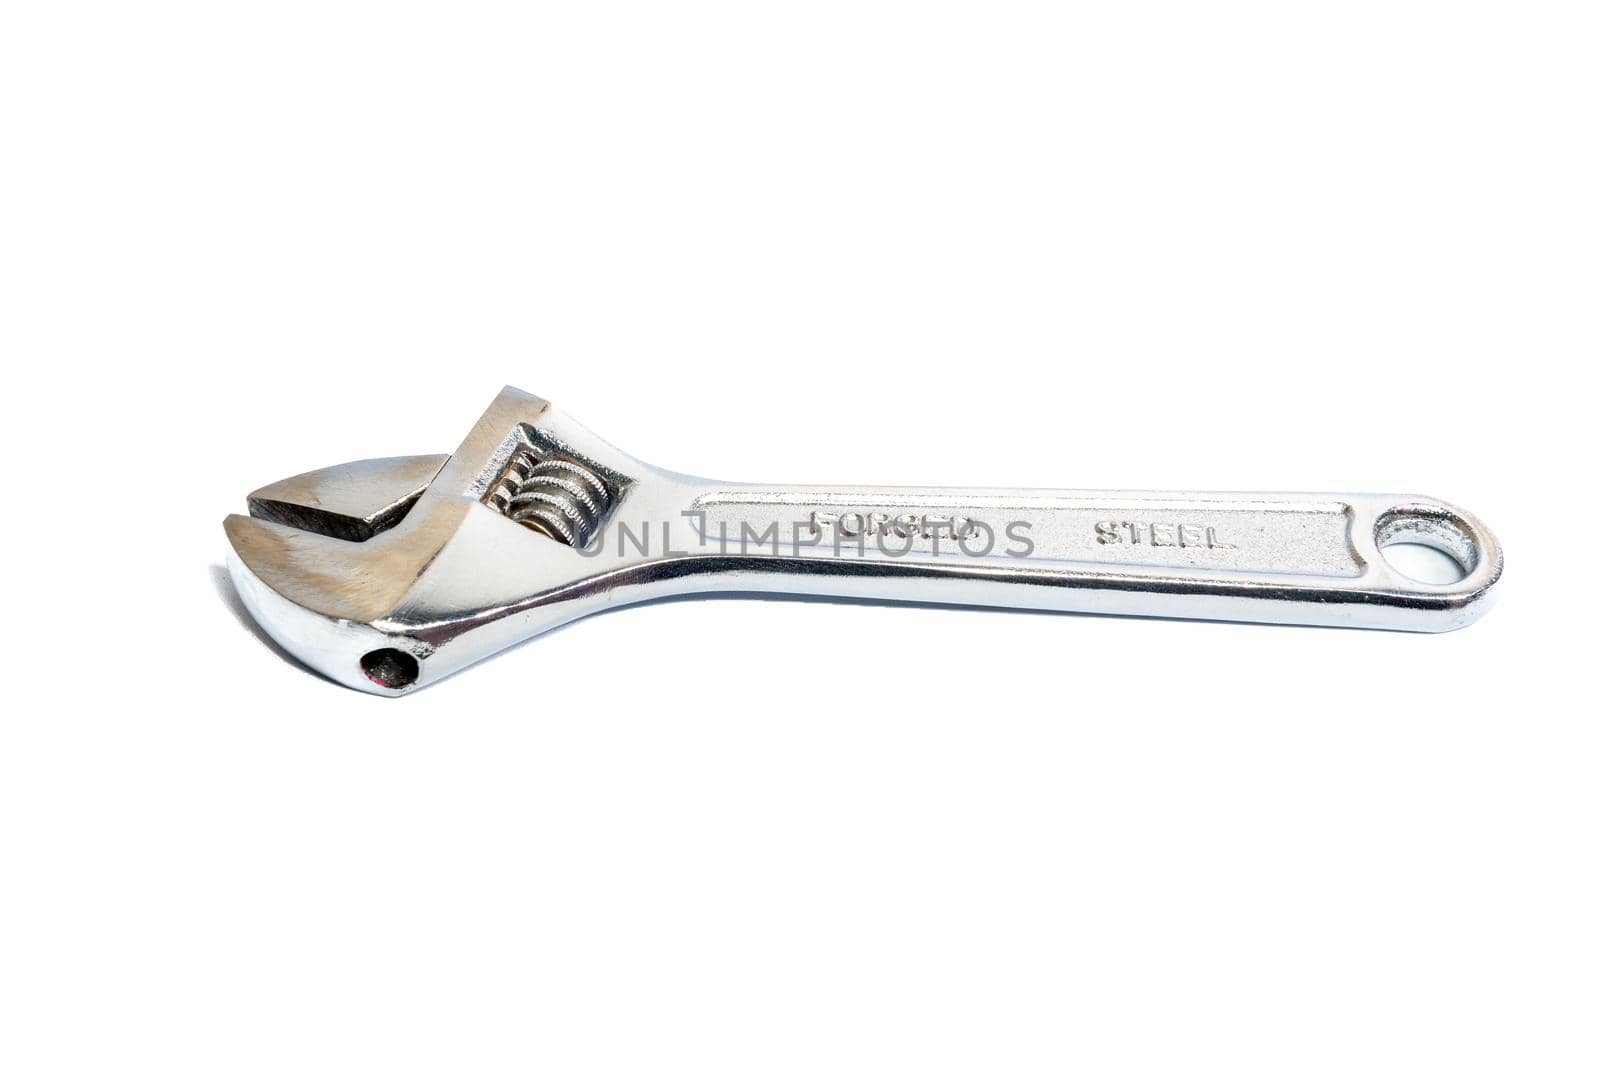 Adjustable wrench isolated in white background. by Ballstertrw